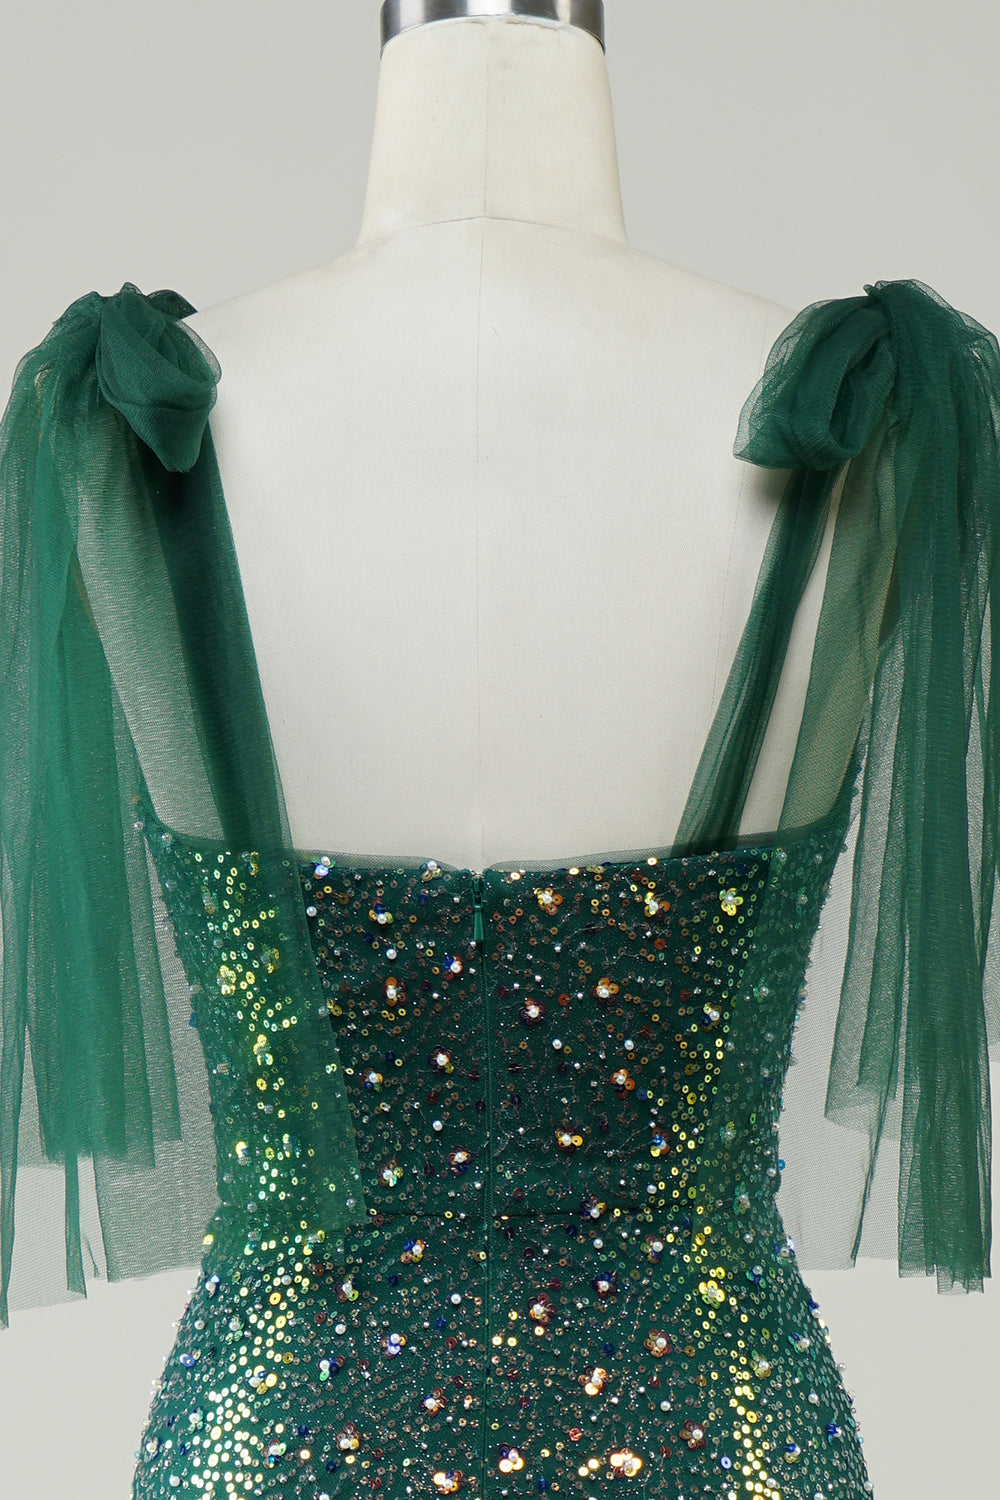 Sparkly Dark Green Mermaid Sequin Long Prom Dress with Slit